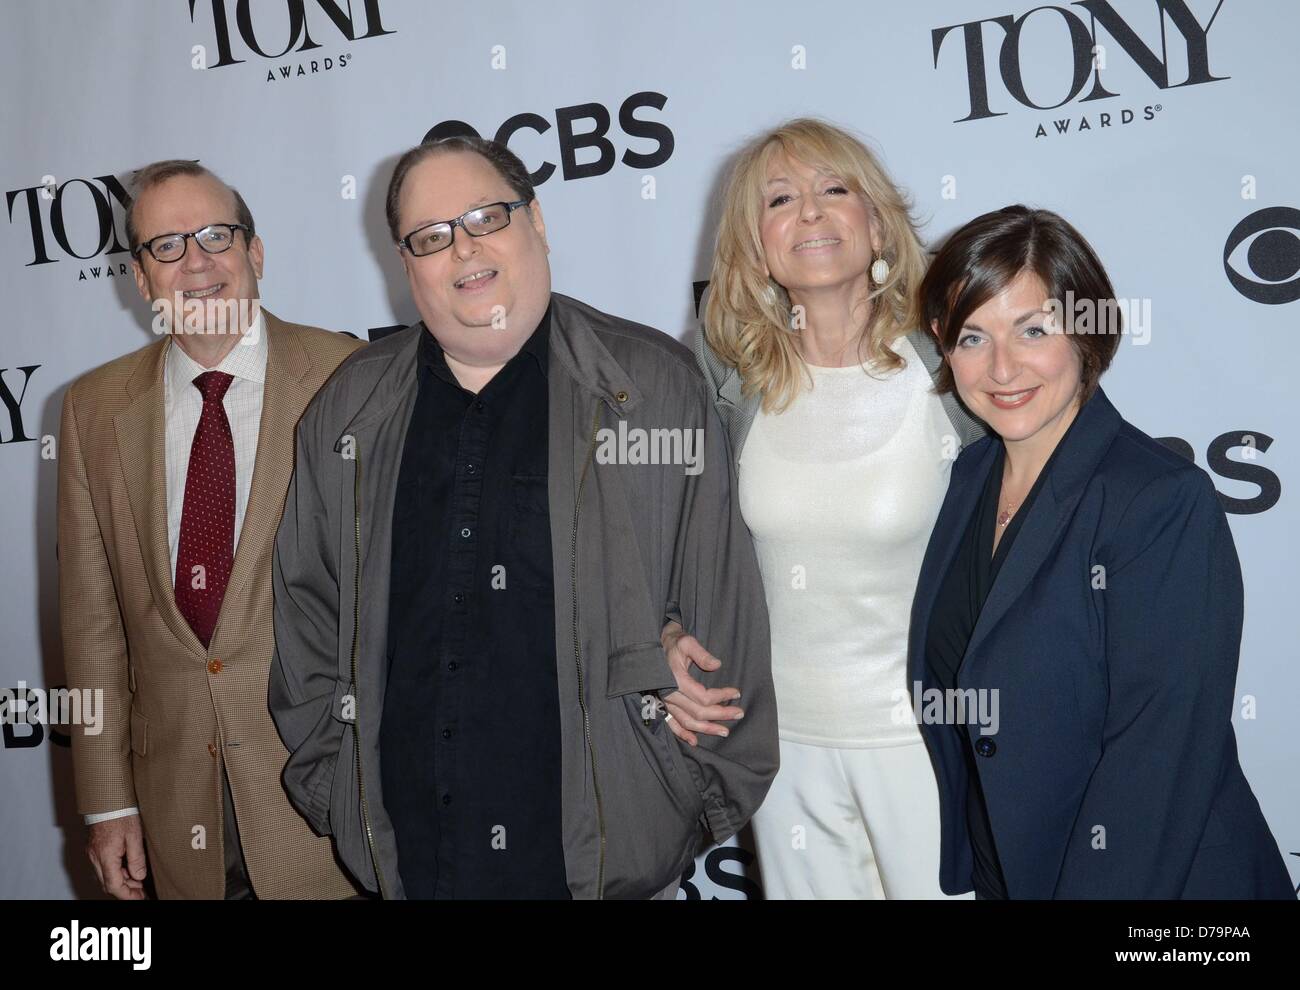 New York, NY, USA. May 1, 2013. Barry Grove, Richard Greenberg, Judith Light, Mandy Greenfield at The Tony Award Meet the Nominees Press Junket, The Millennium Broadway Hotel Times Square, New York, NY May 1, 2013. Photo By: Derek Storm/Everett Collection/Alamy Live News Stock Photo